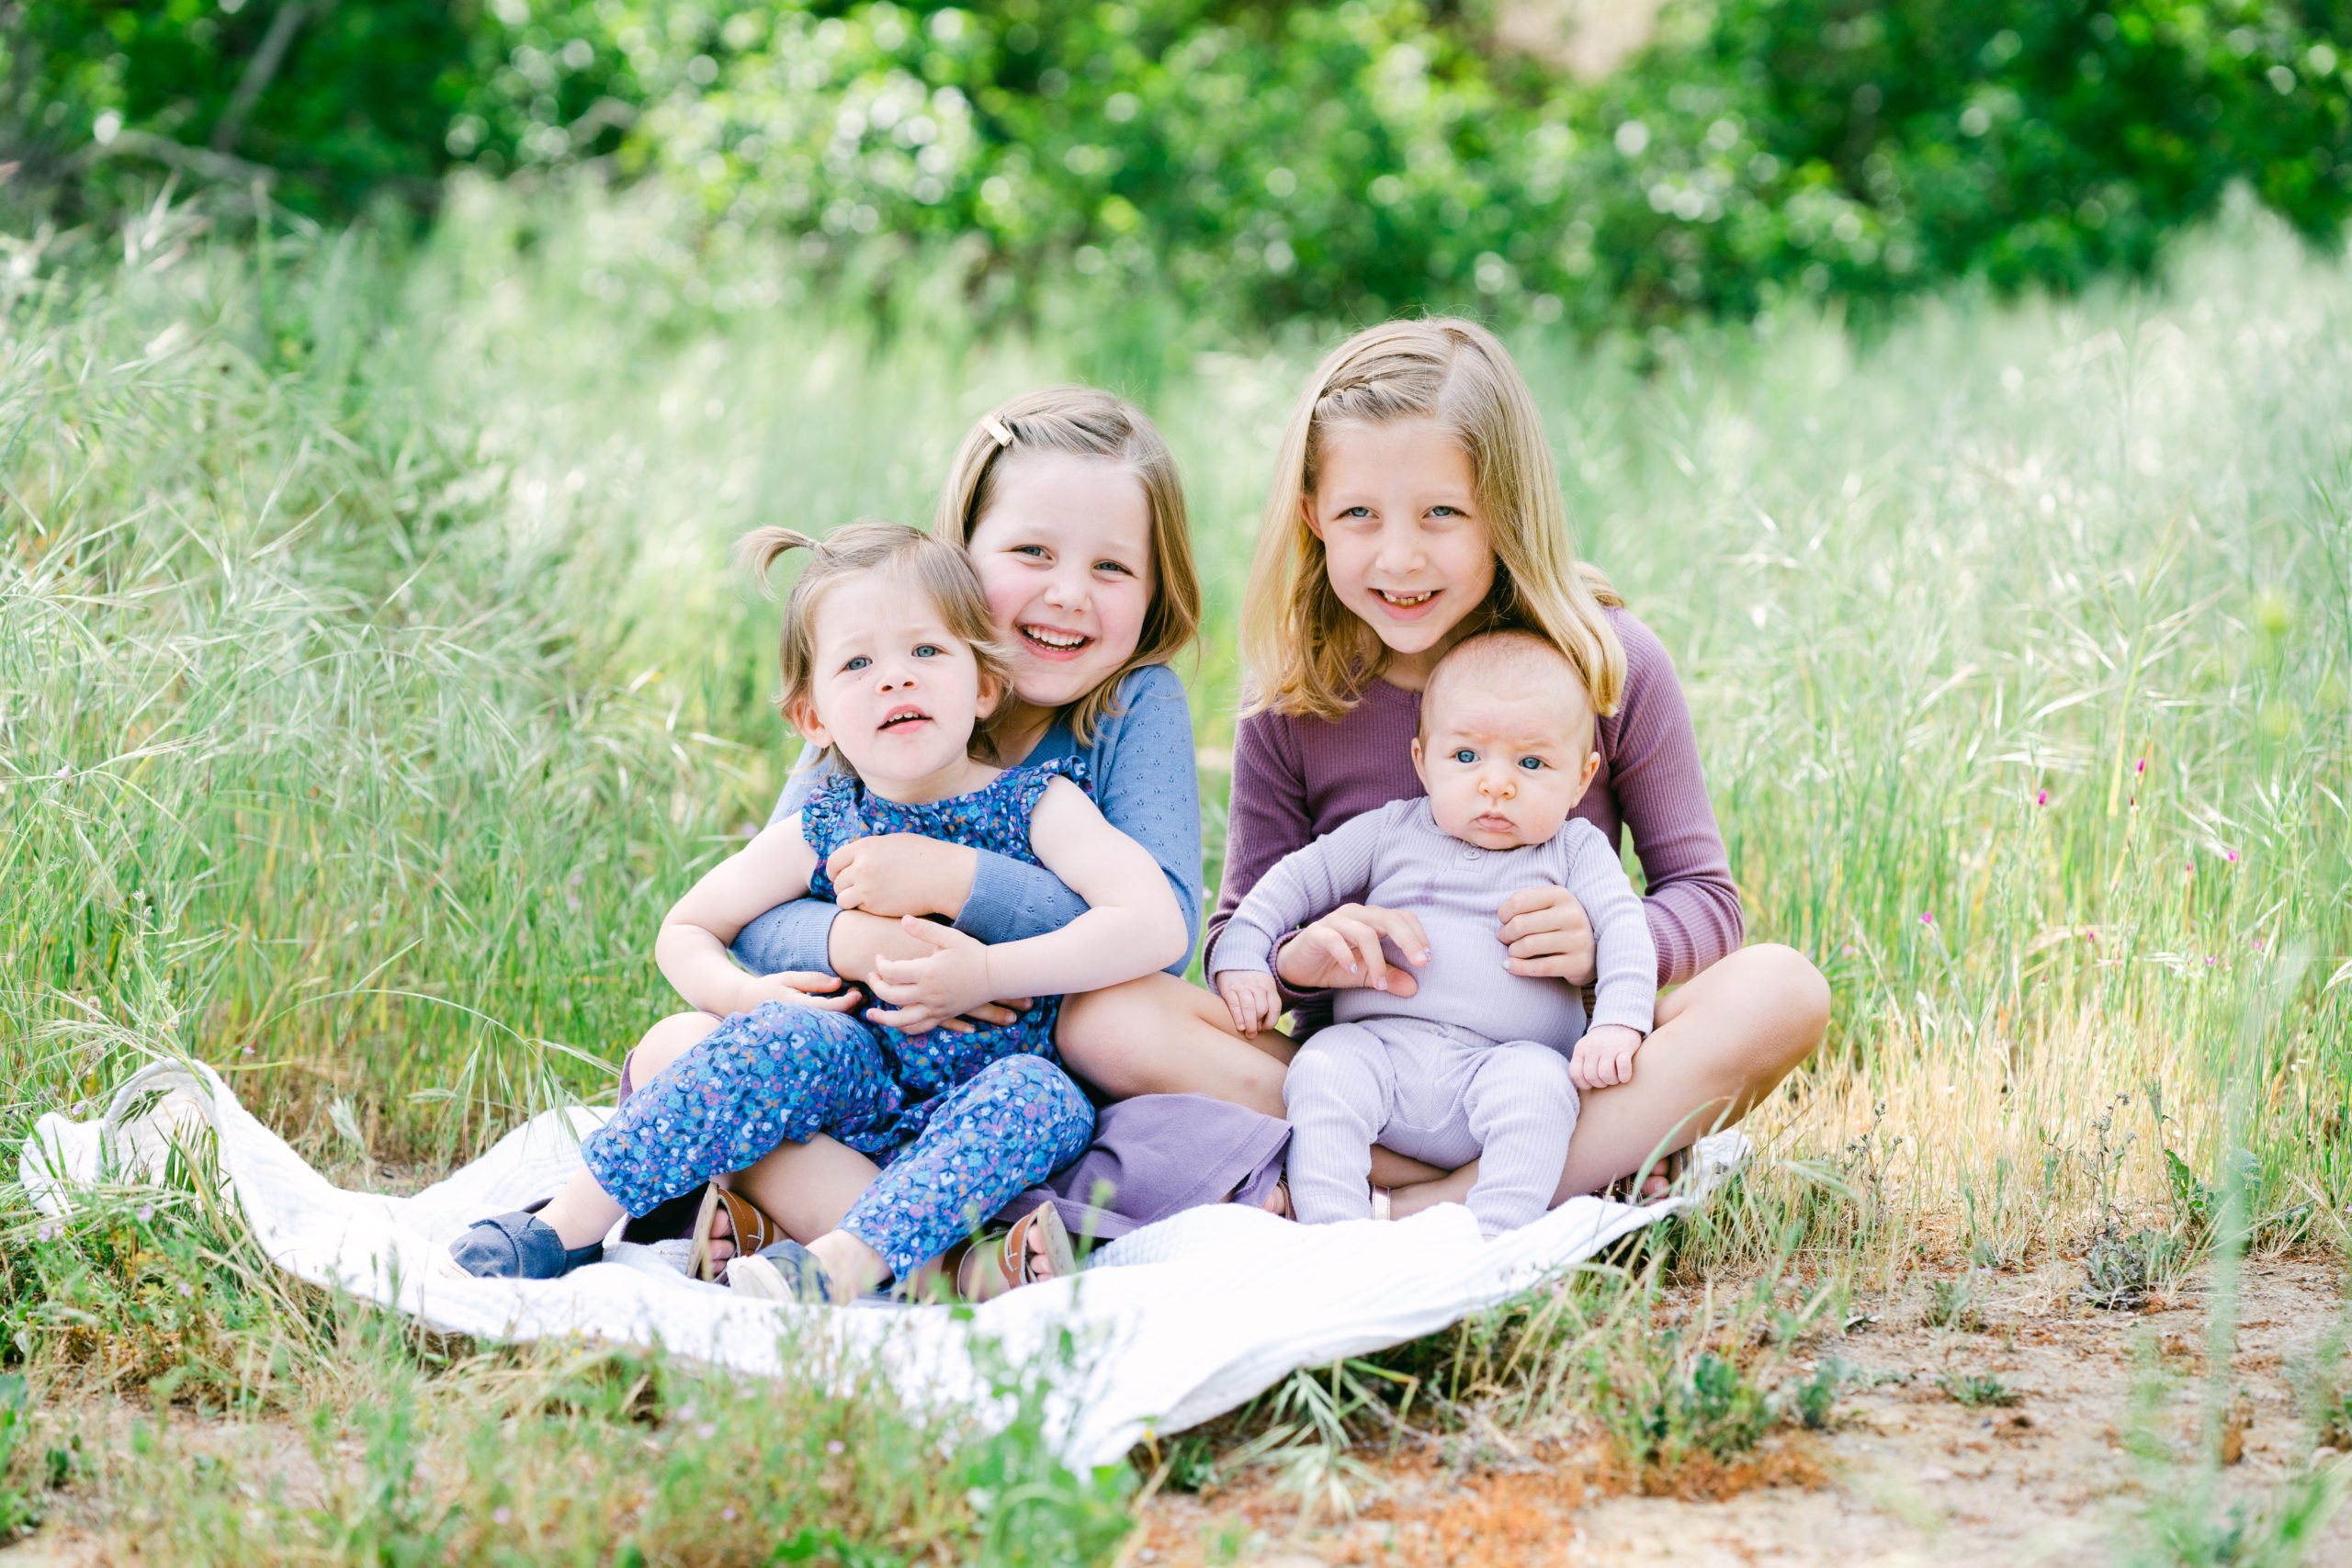 Four white children pose in the grassy fields of Marian Bear park. Three girls and a baby boy. The two older girls hold the younger one and the baby on their laps.